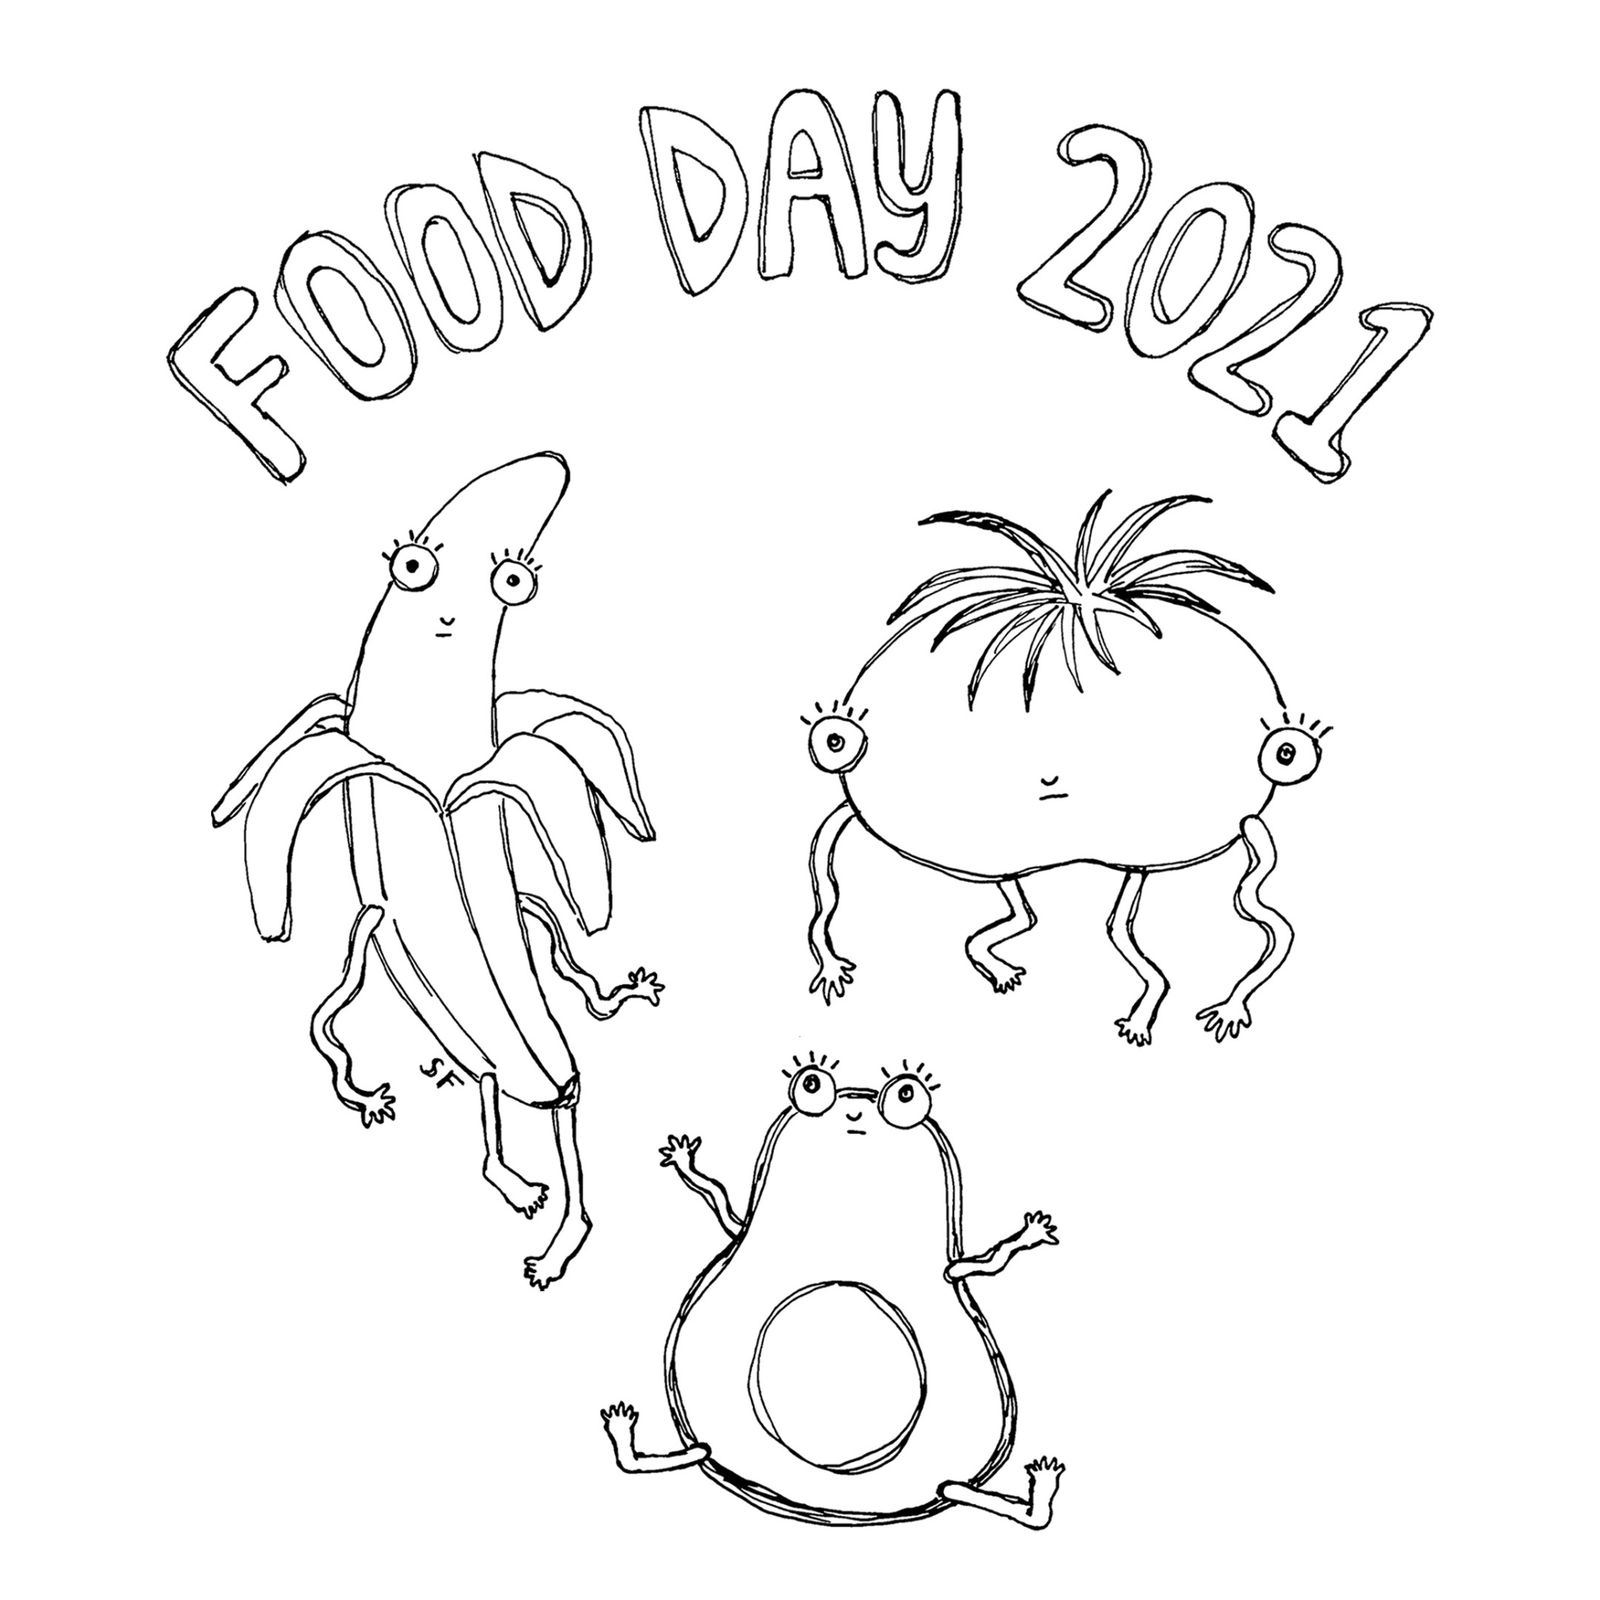 Food Day 2021